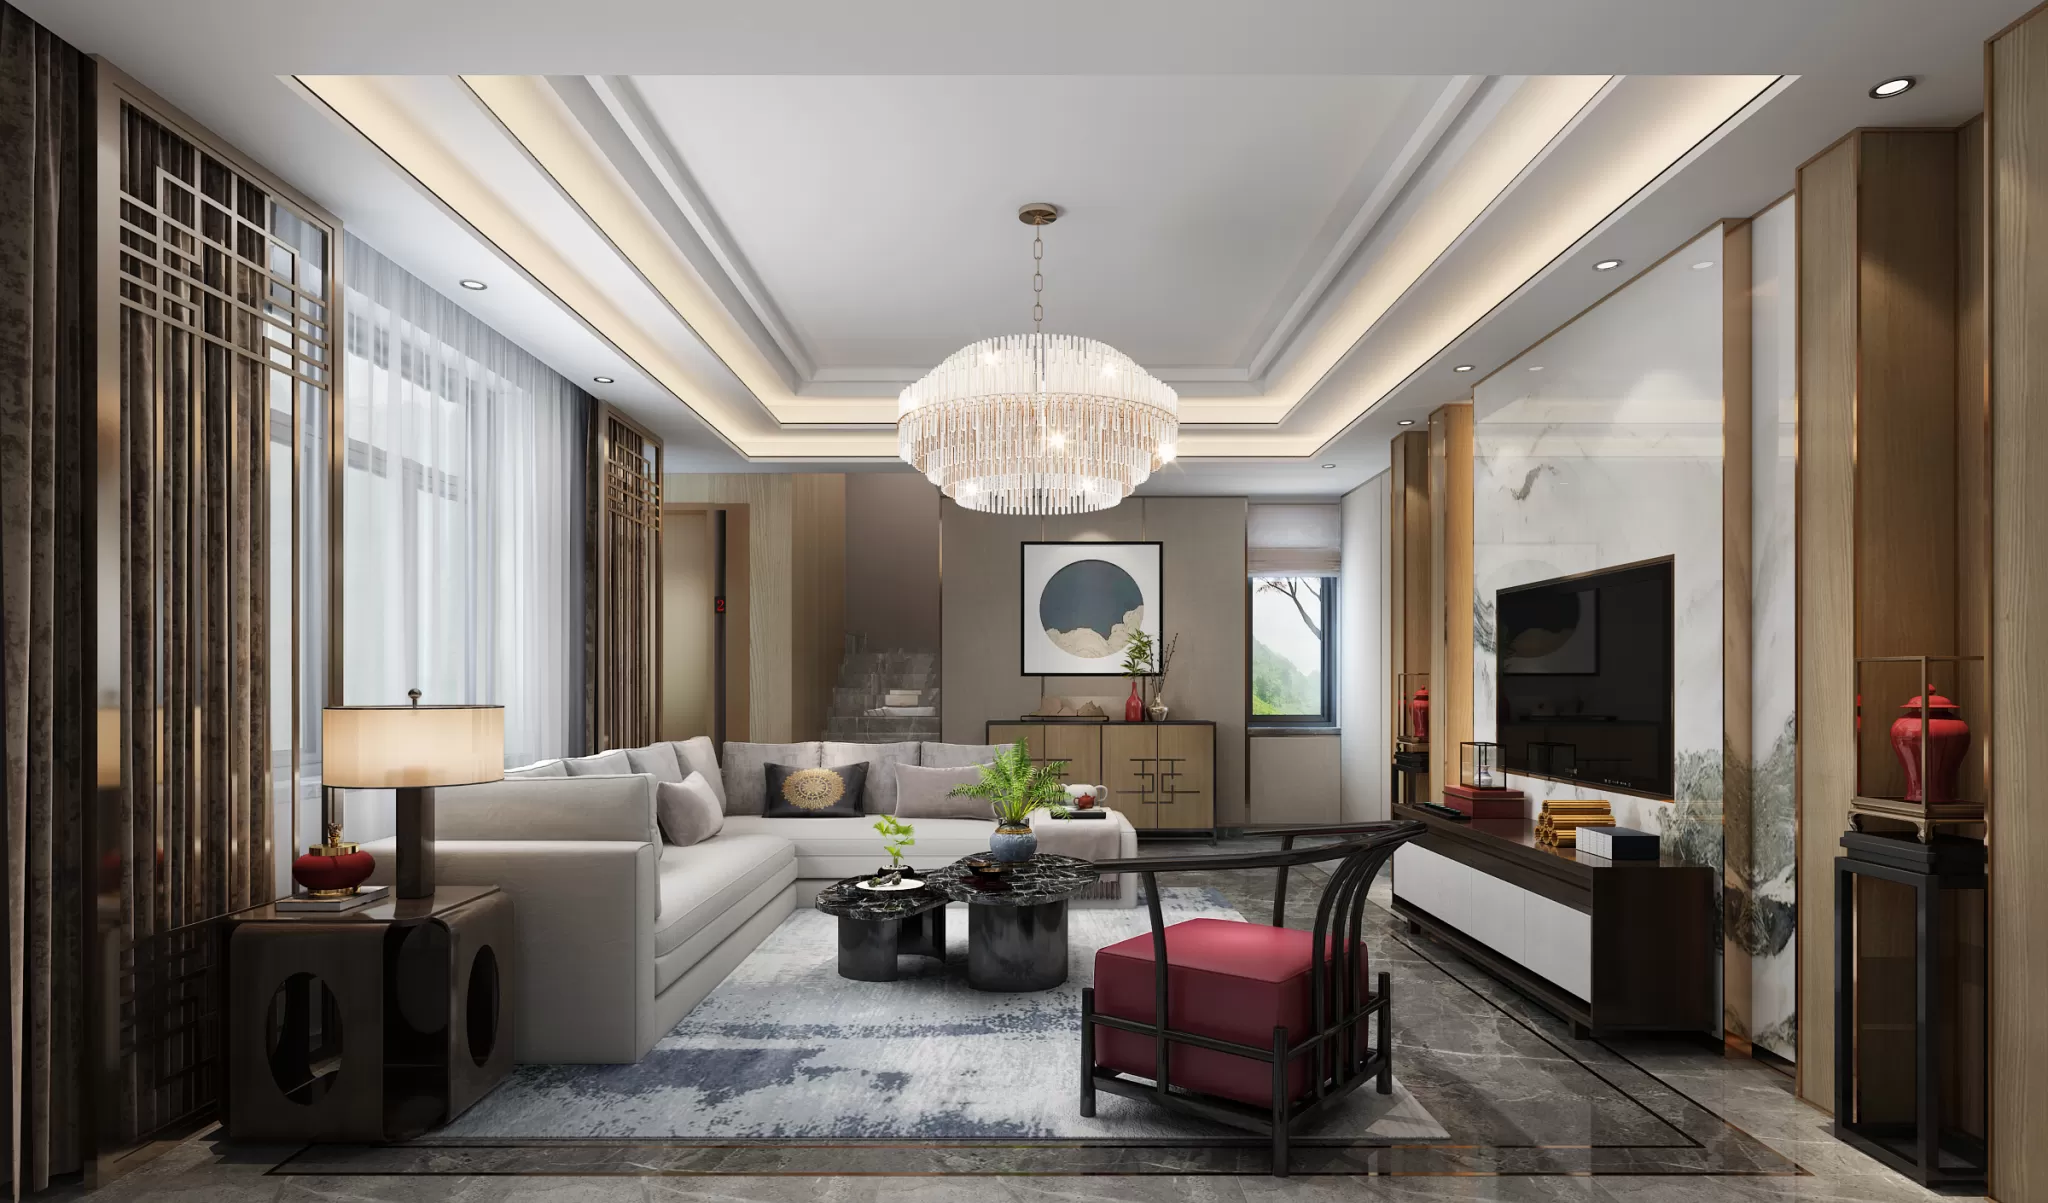 DESMOD INTERIOR 2021 (VRAY) – 4. LIVING ROOM – CHINESE – 103